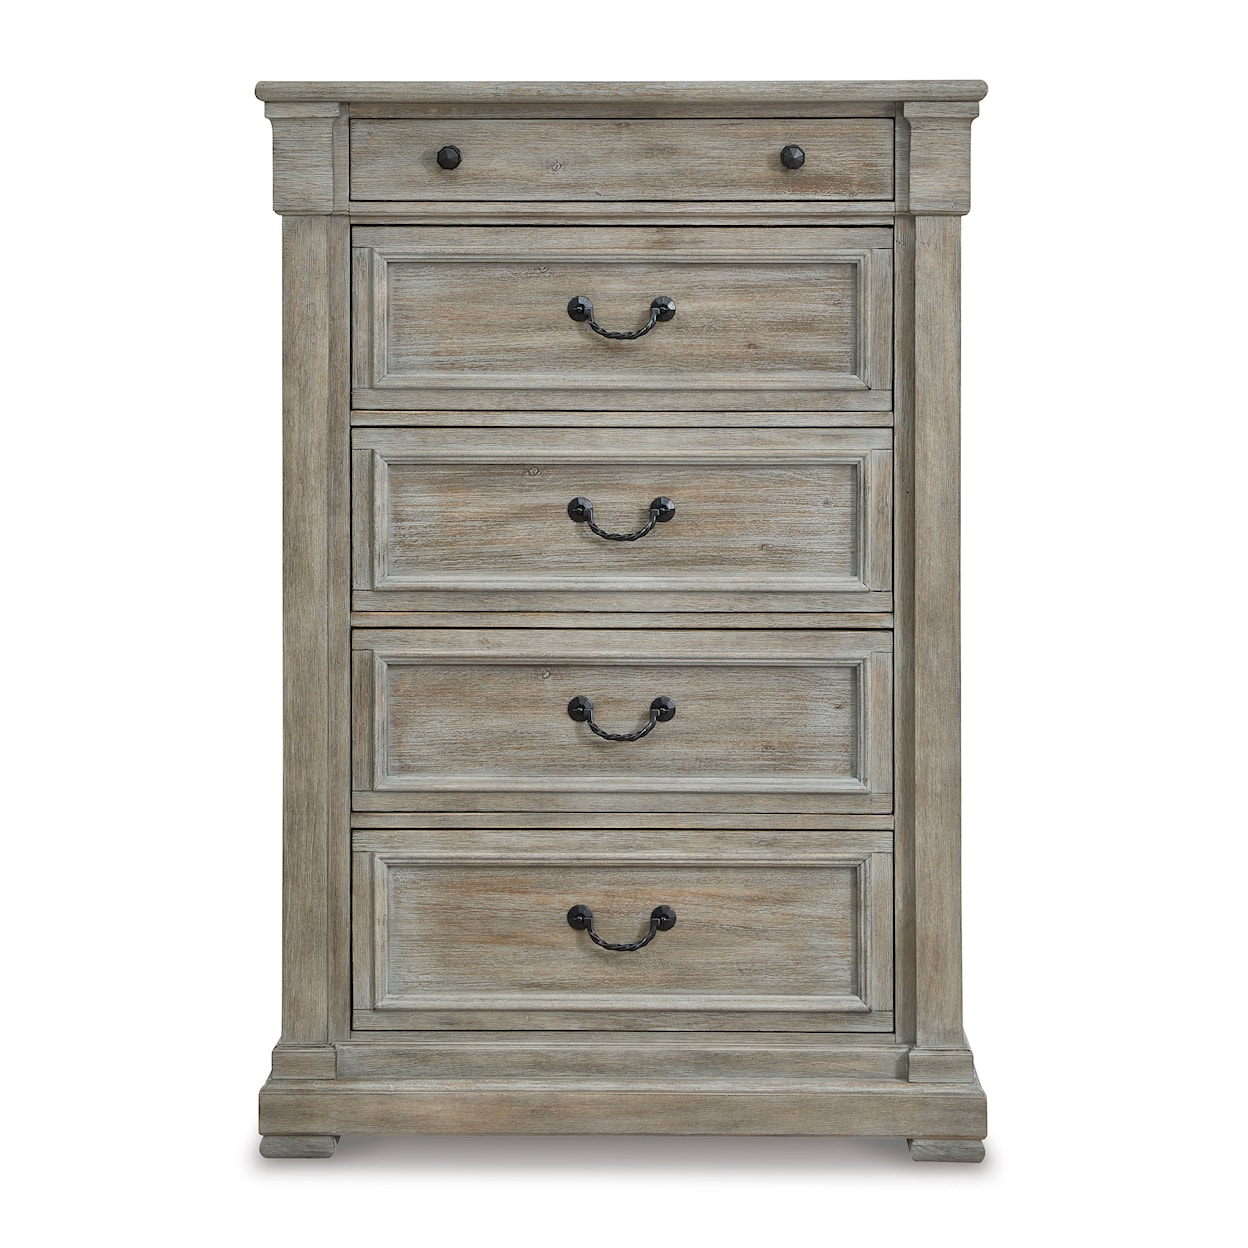 Ashley Furniture Signature Design Moreshire Chest of Drawers